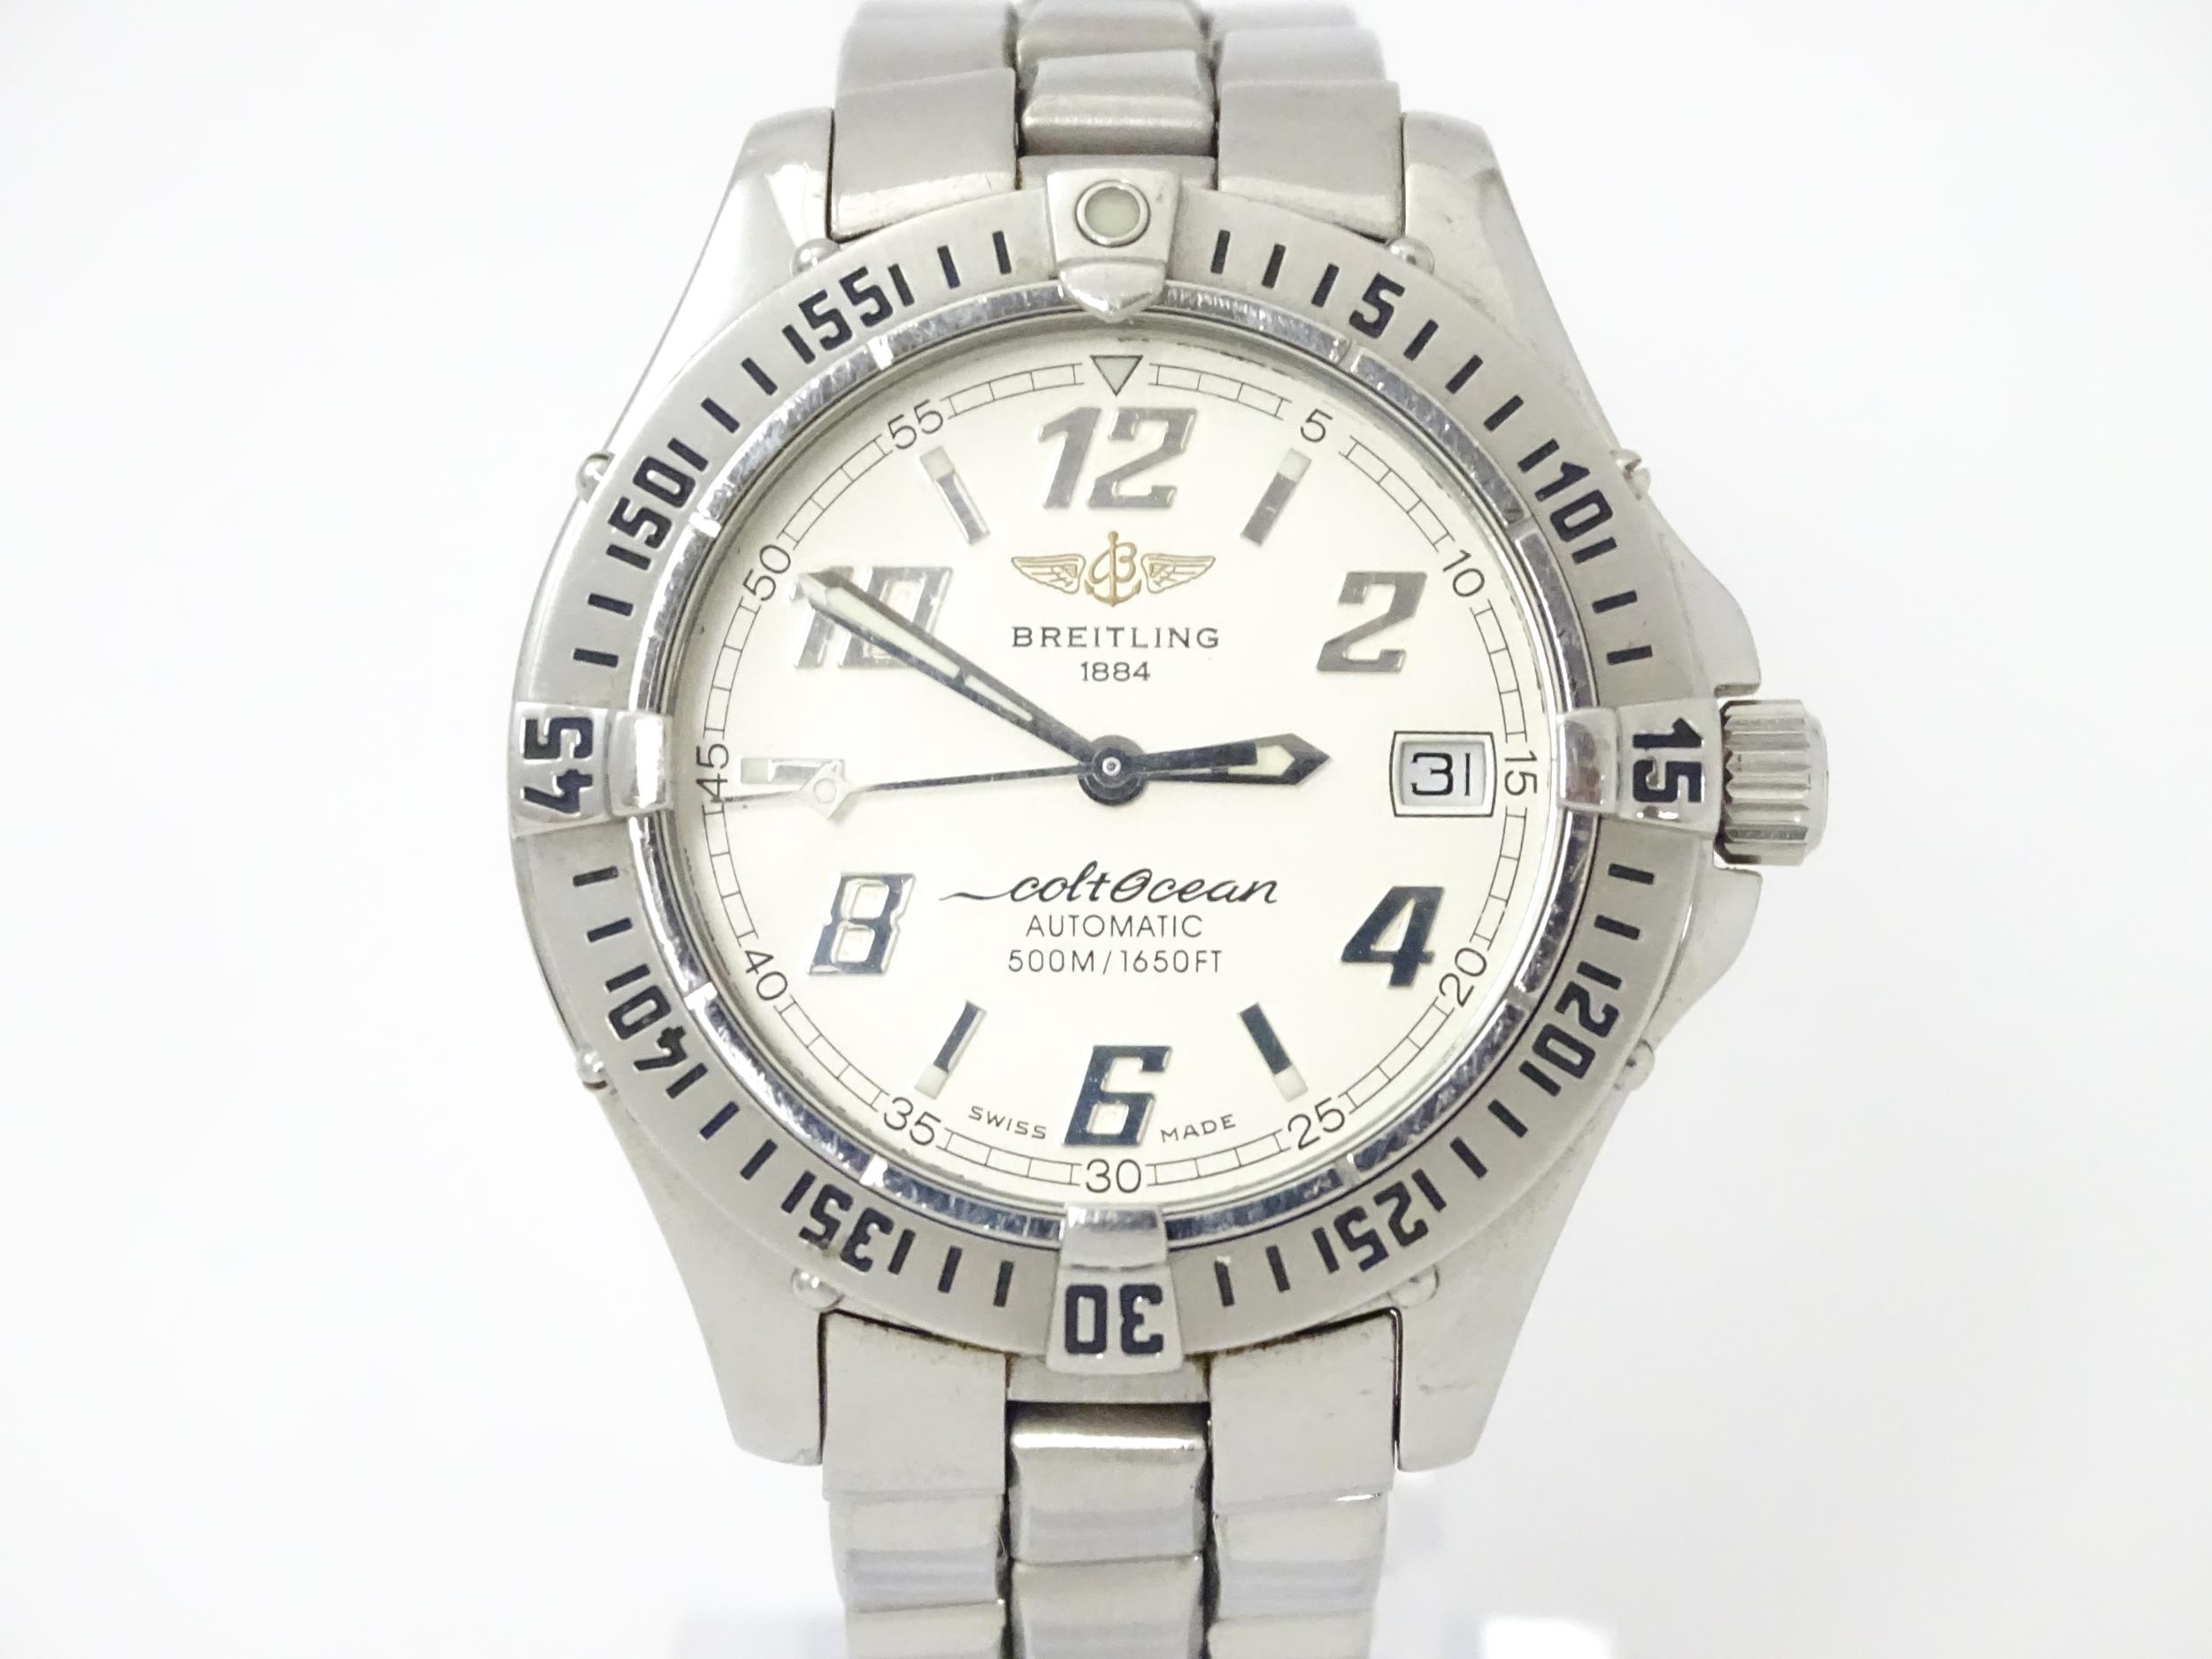 A Breitling Colt Ocean automatic wristwatch, ref. A17050, the signed dial having silver tone